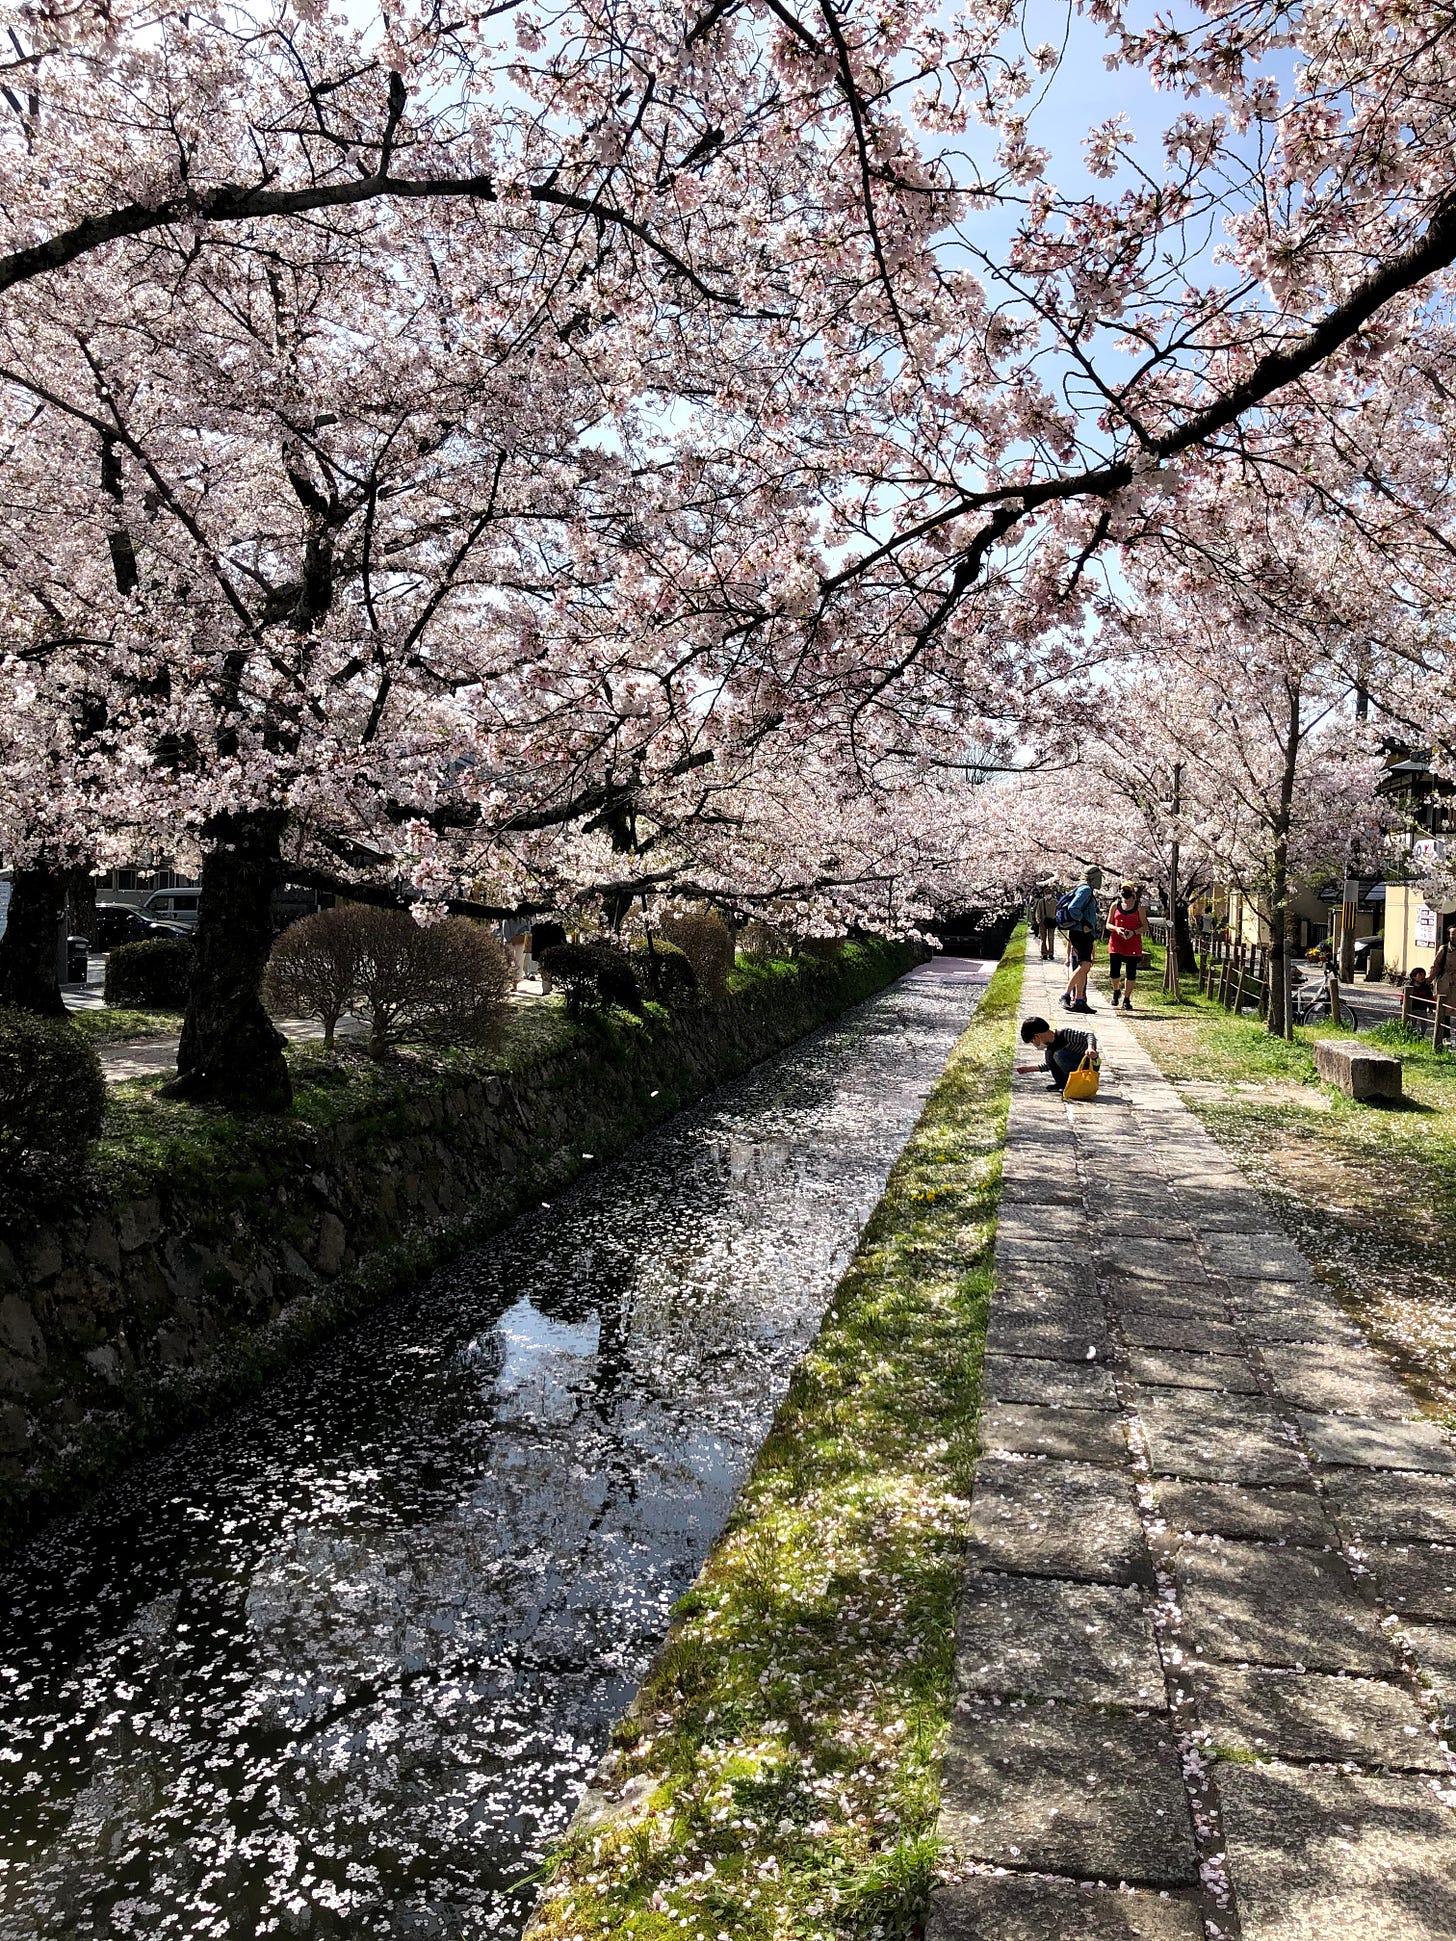 A child looks at something by a river surrounded by cherry blossoms.